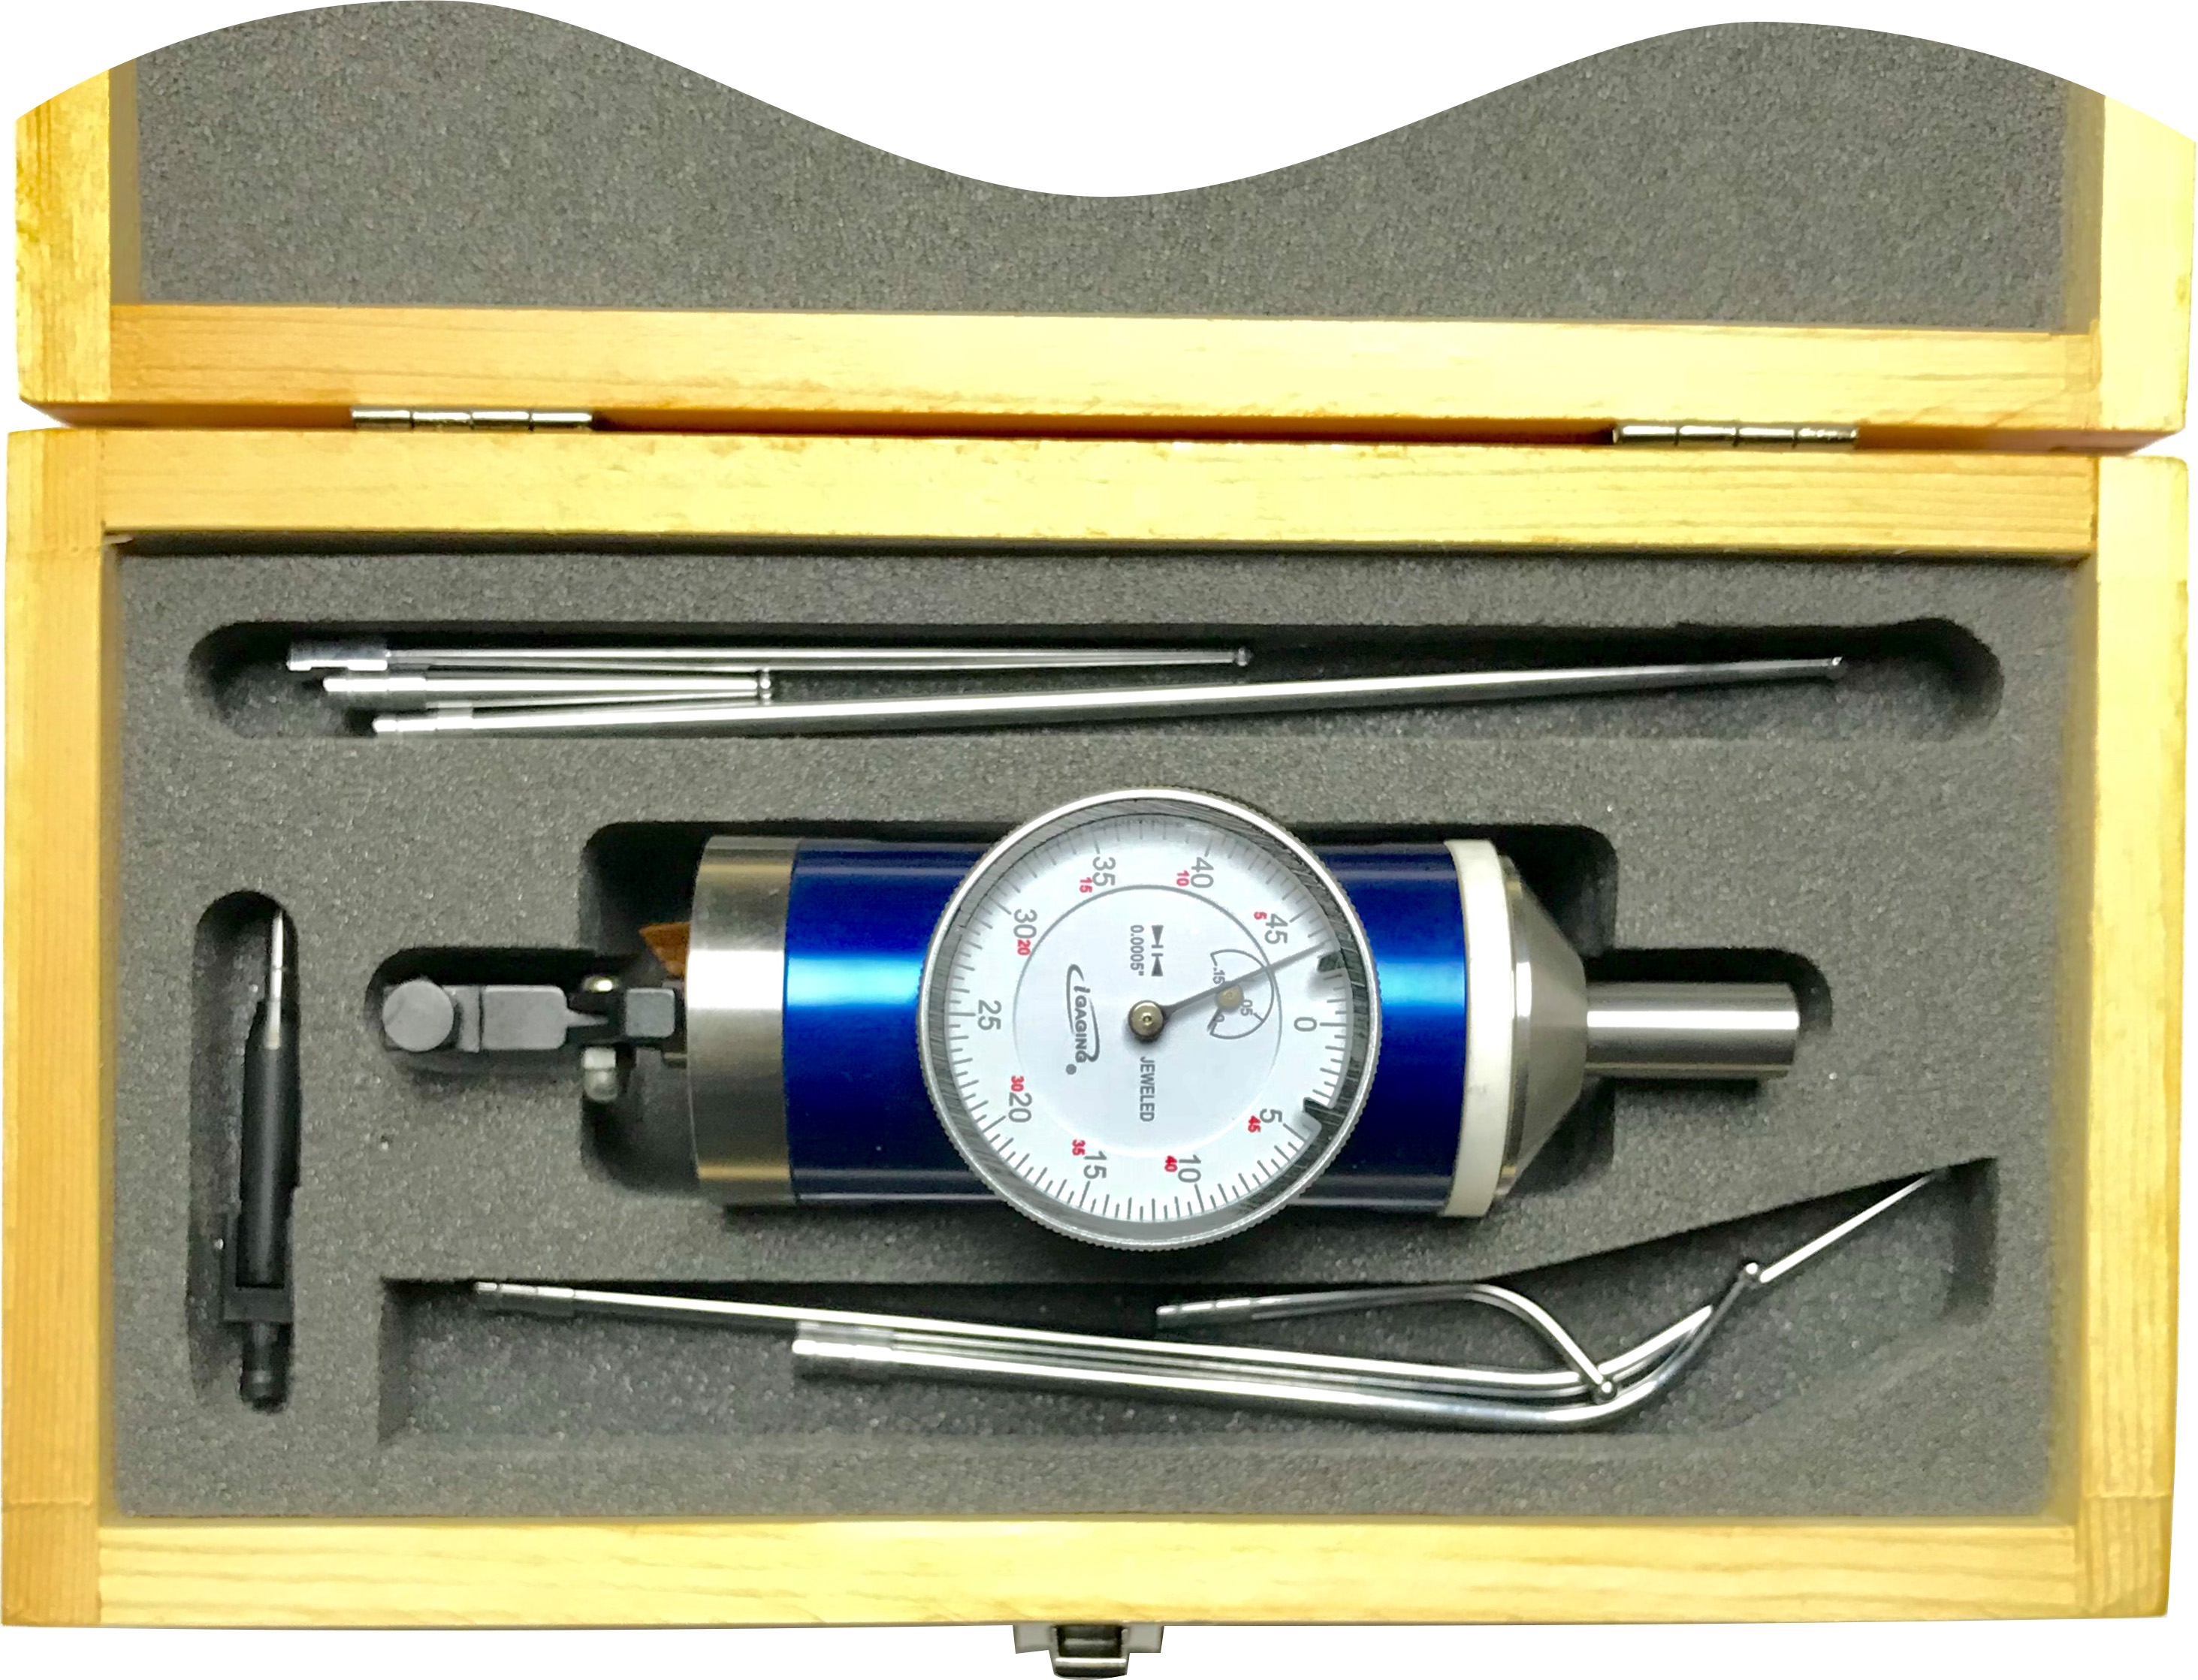 iGaging CO-AX COAXIAL Centering Test Dial Indicator Complete Set 400-C02